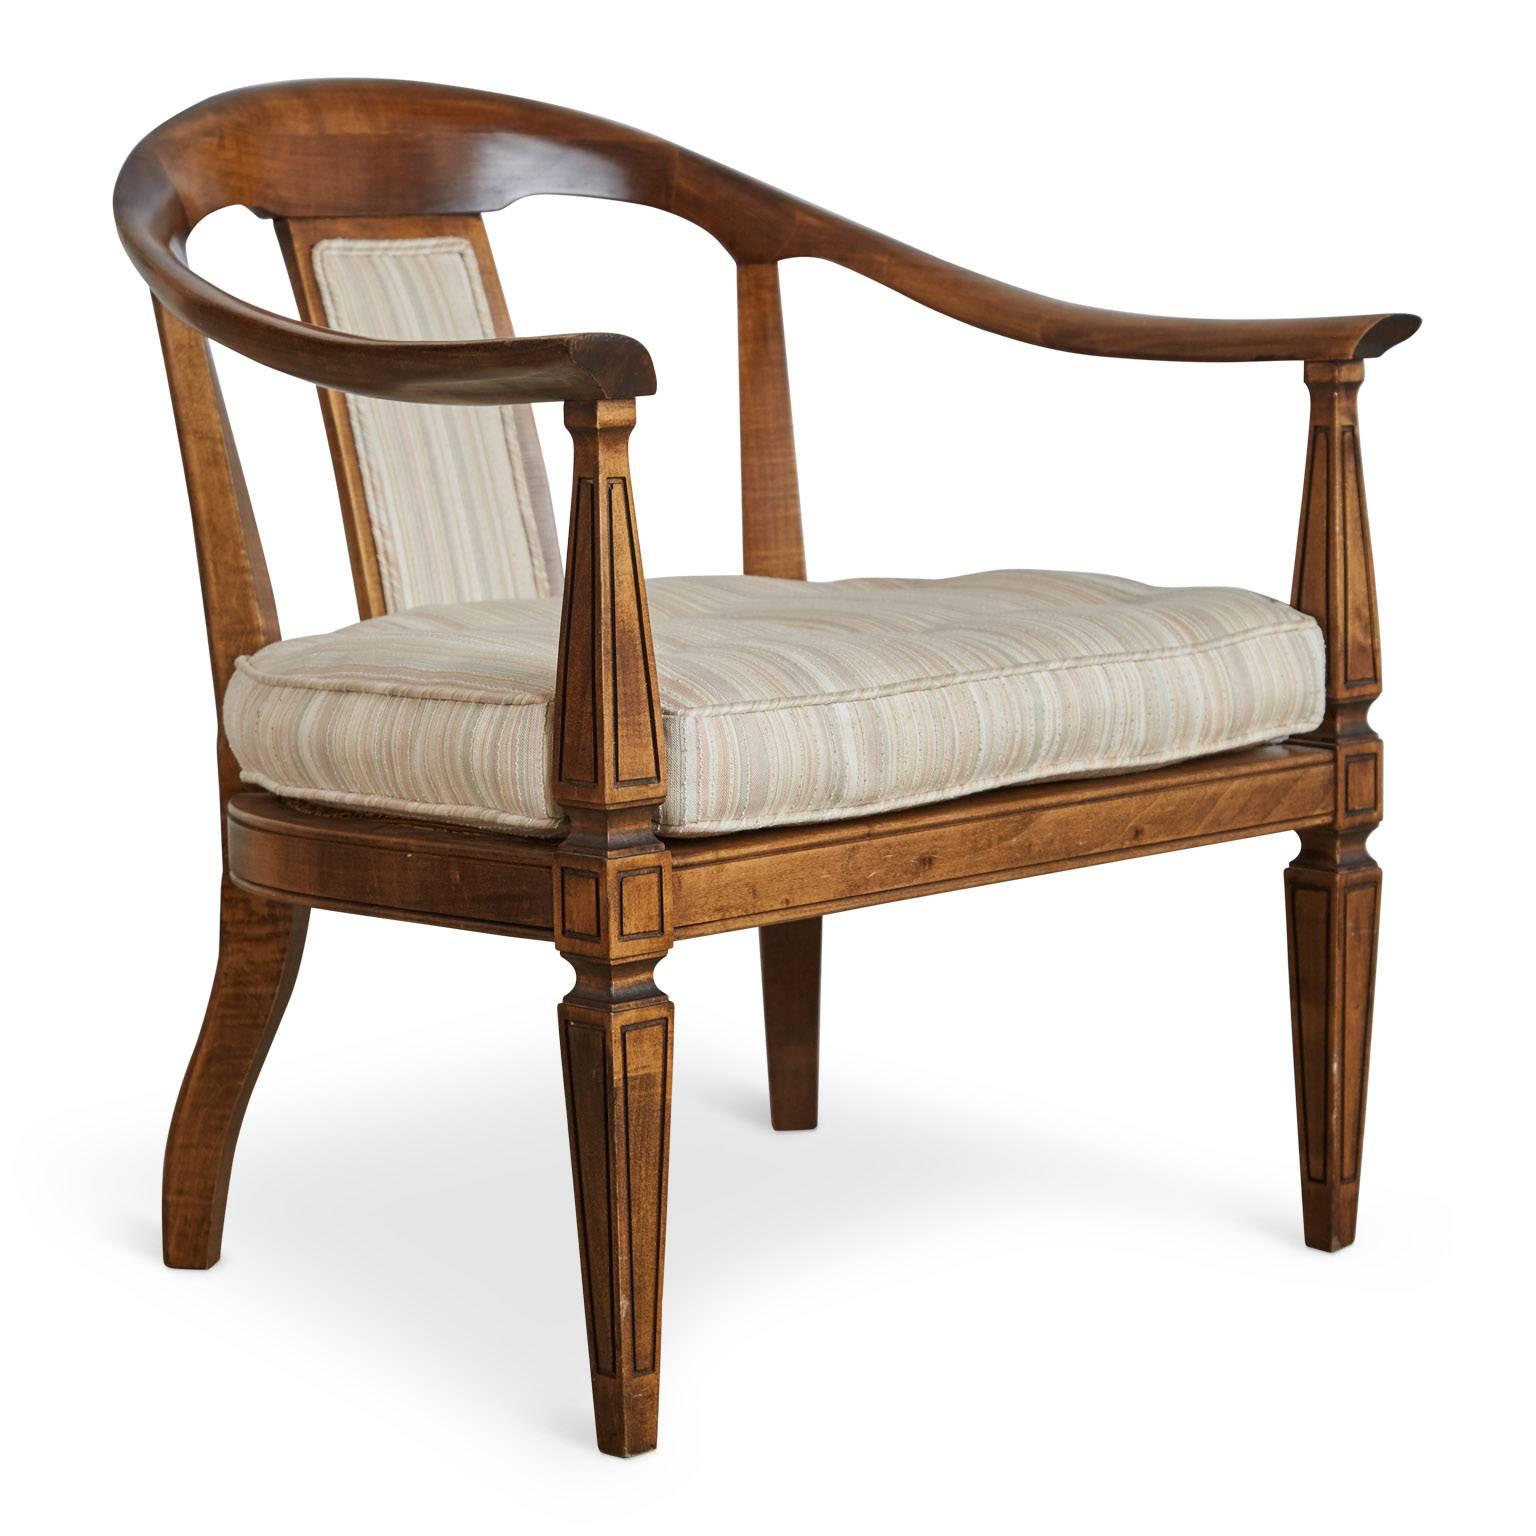 Gracefully curved pair of two armchairs. The frame is fabricated from walnut with beautiful curved backs, armrests, flared handholds and fluted legs. The seats feature woven caning which can be found by lifting the removable button tufted box edge